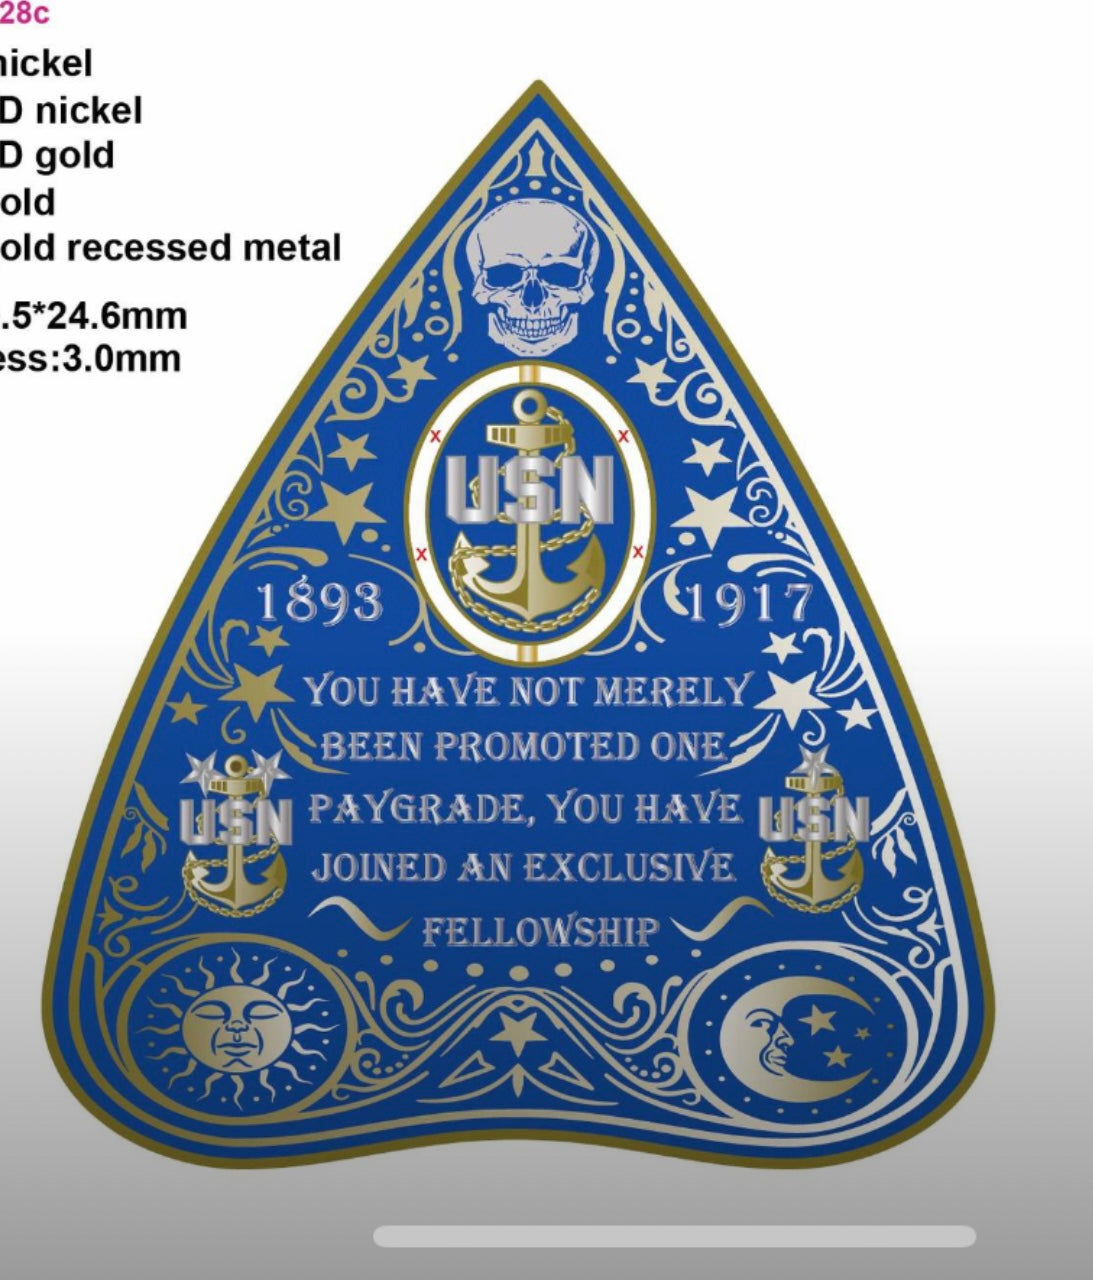 Ouija Planchette Coin Blue and Gold